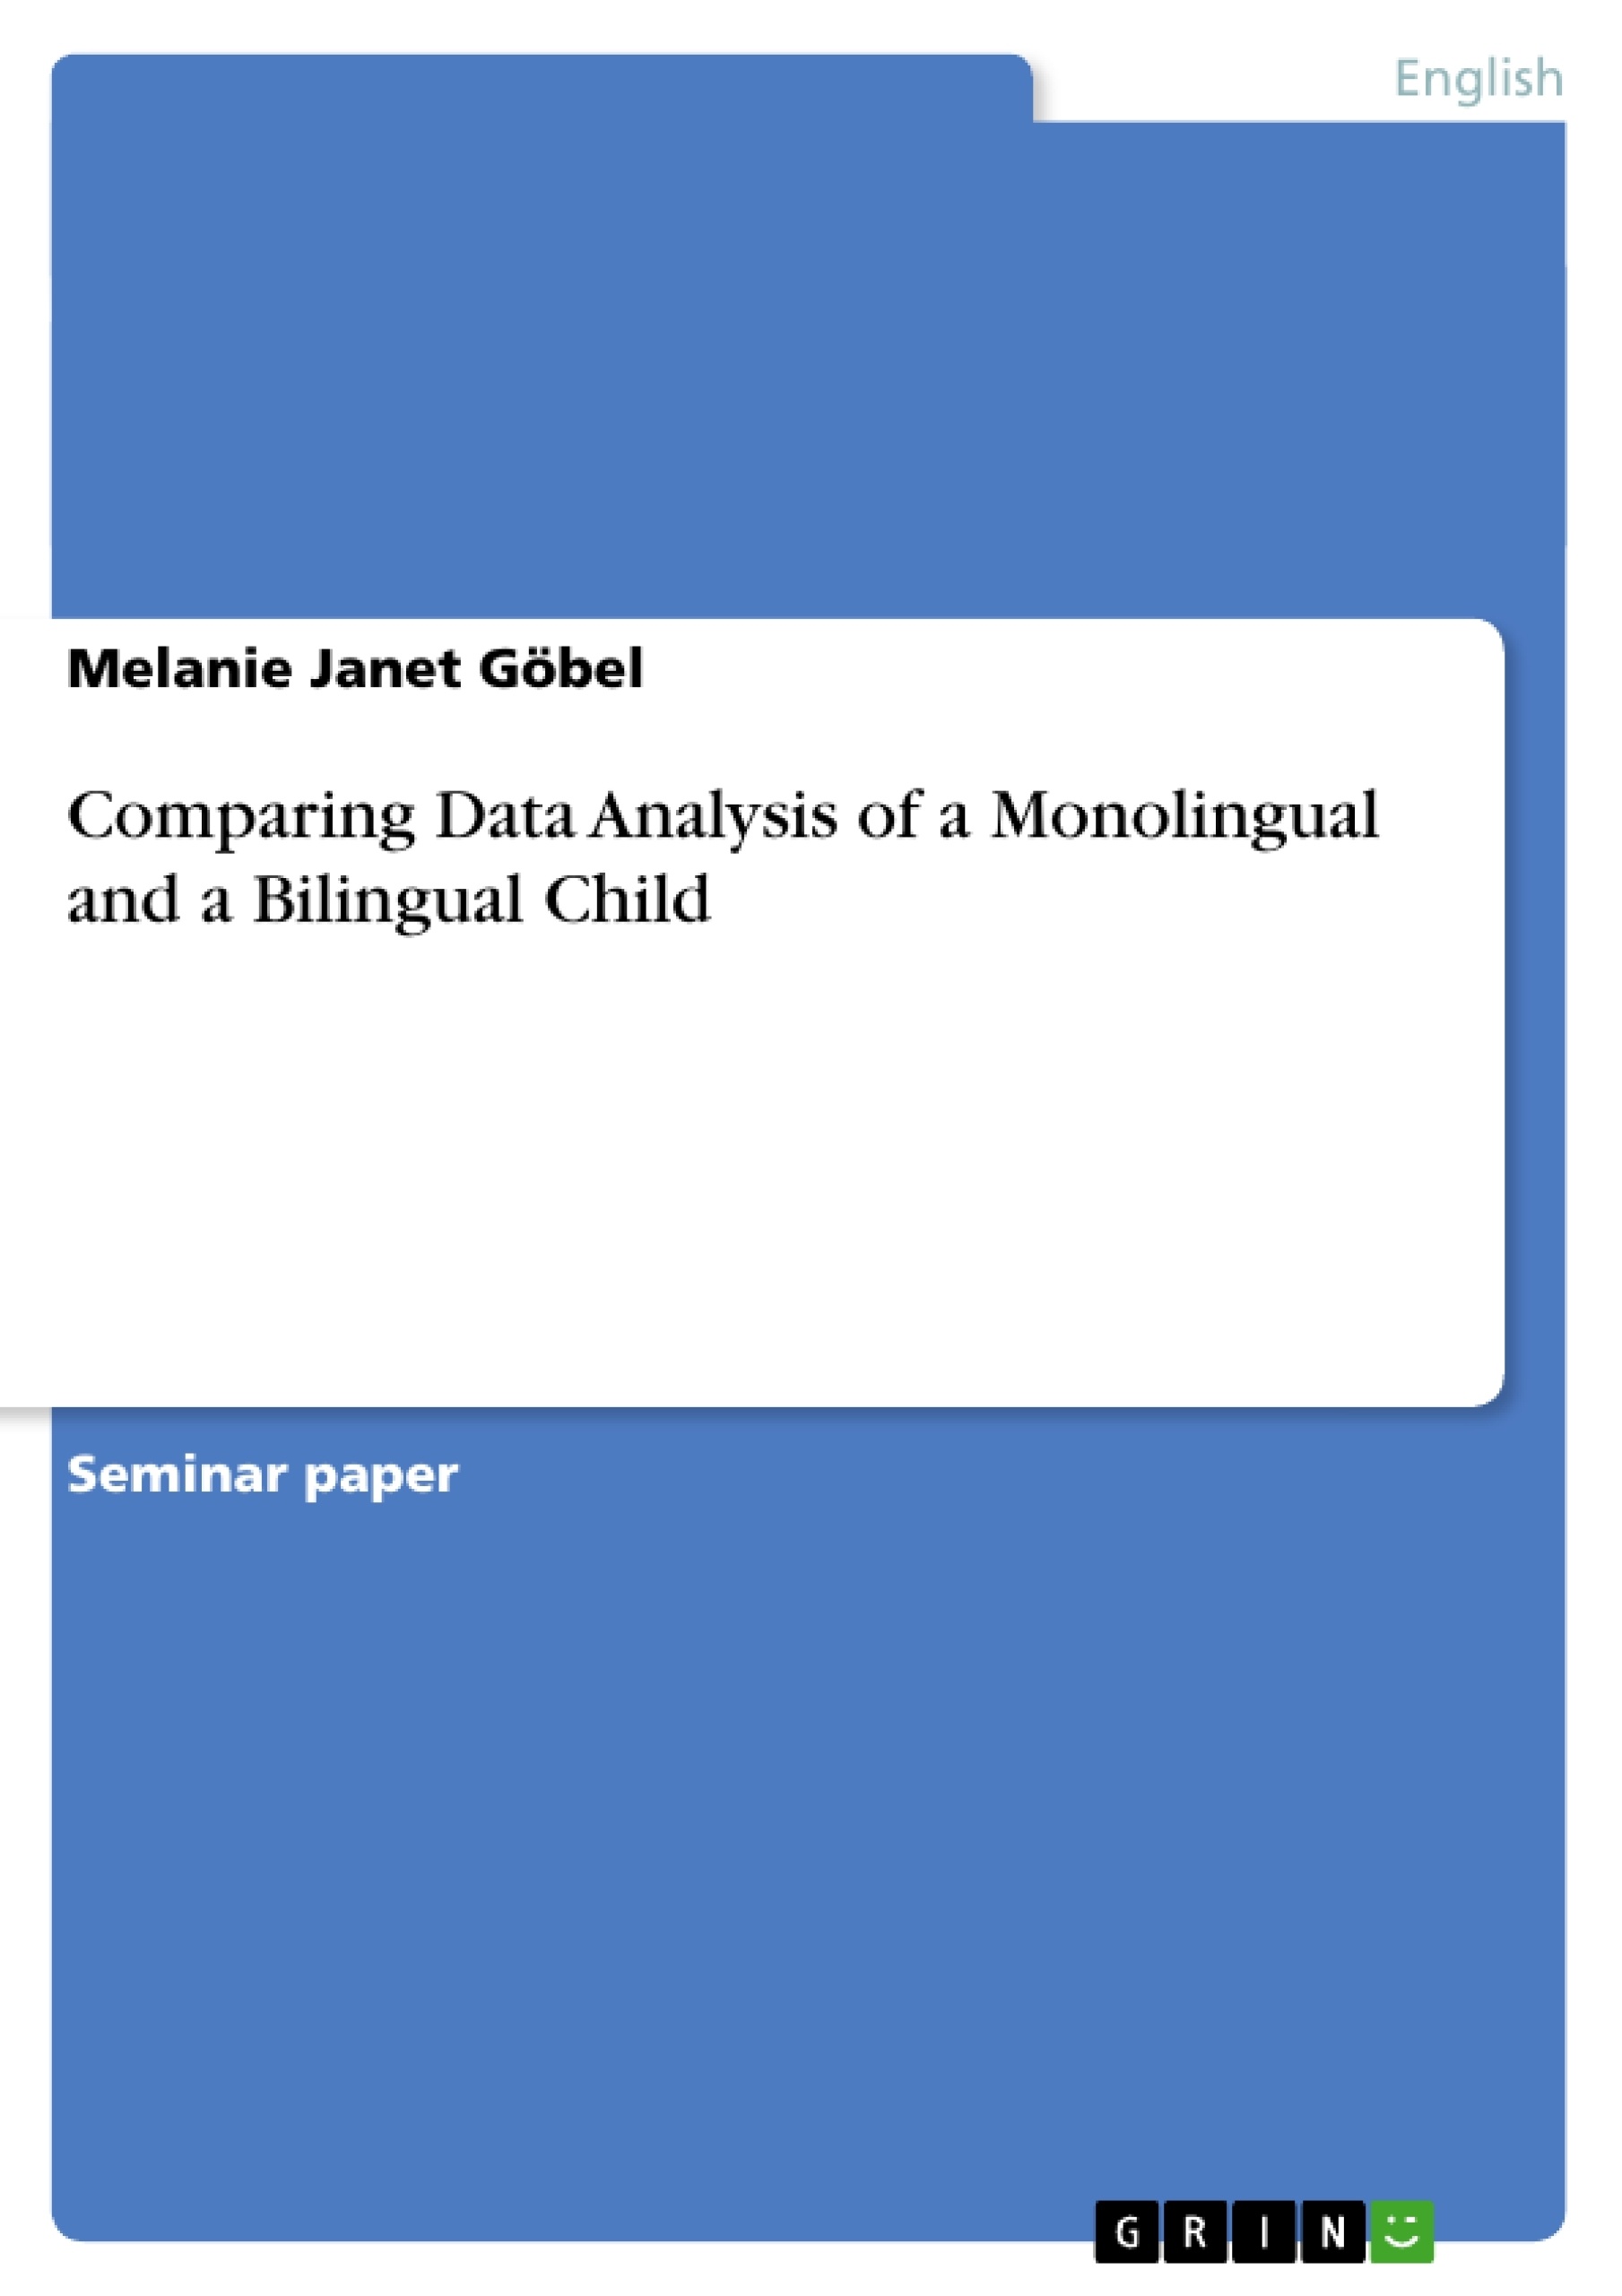 Título: Comparing Data Analysis of a Monolingual and a Bilingual Child